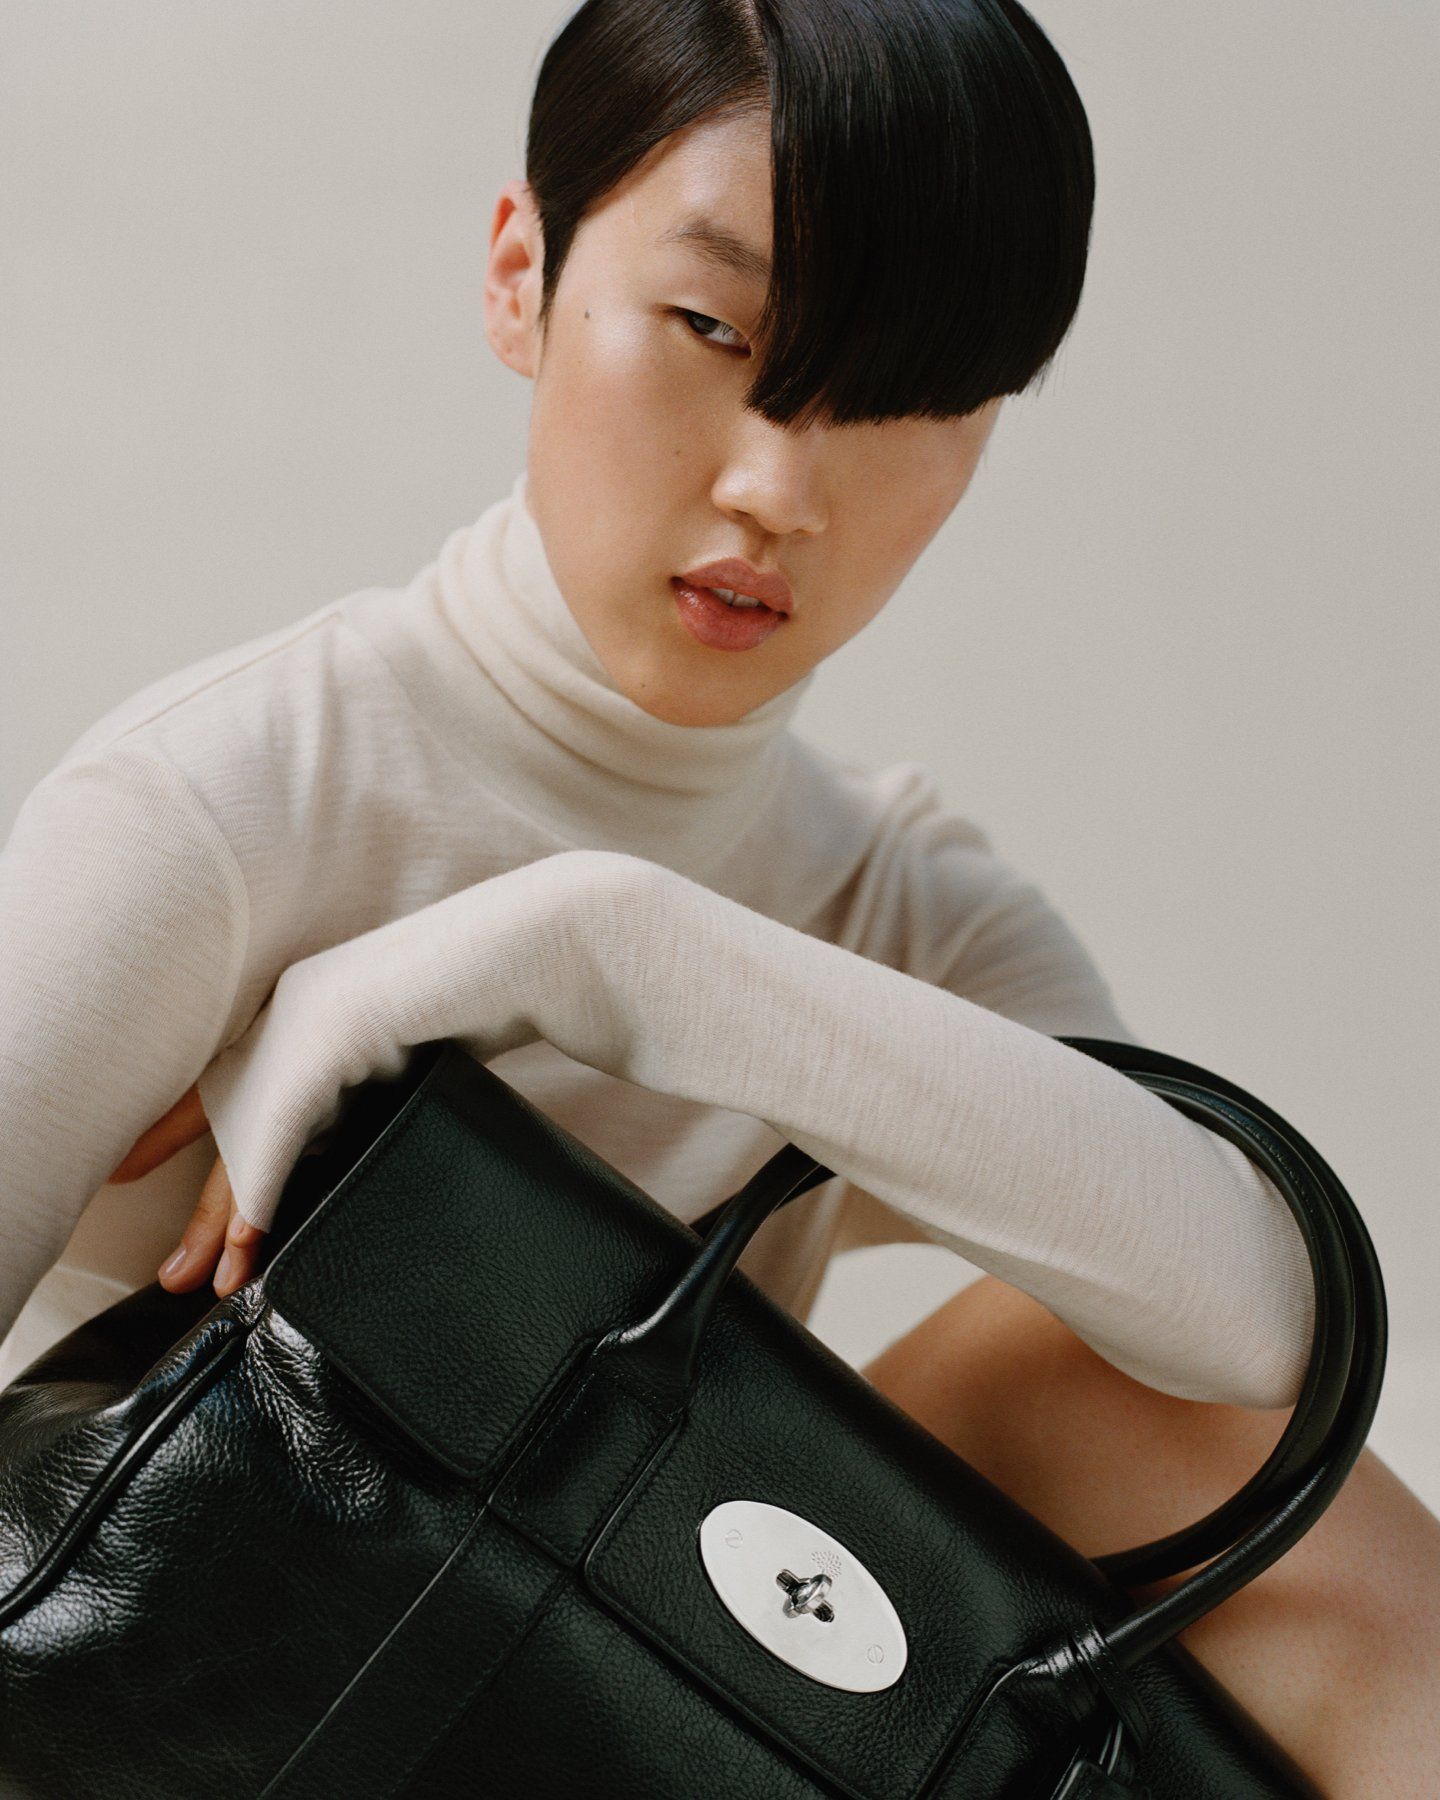 model wearing mulberry bayswater bag in black high shine leather